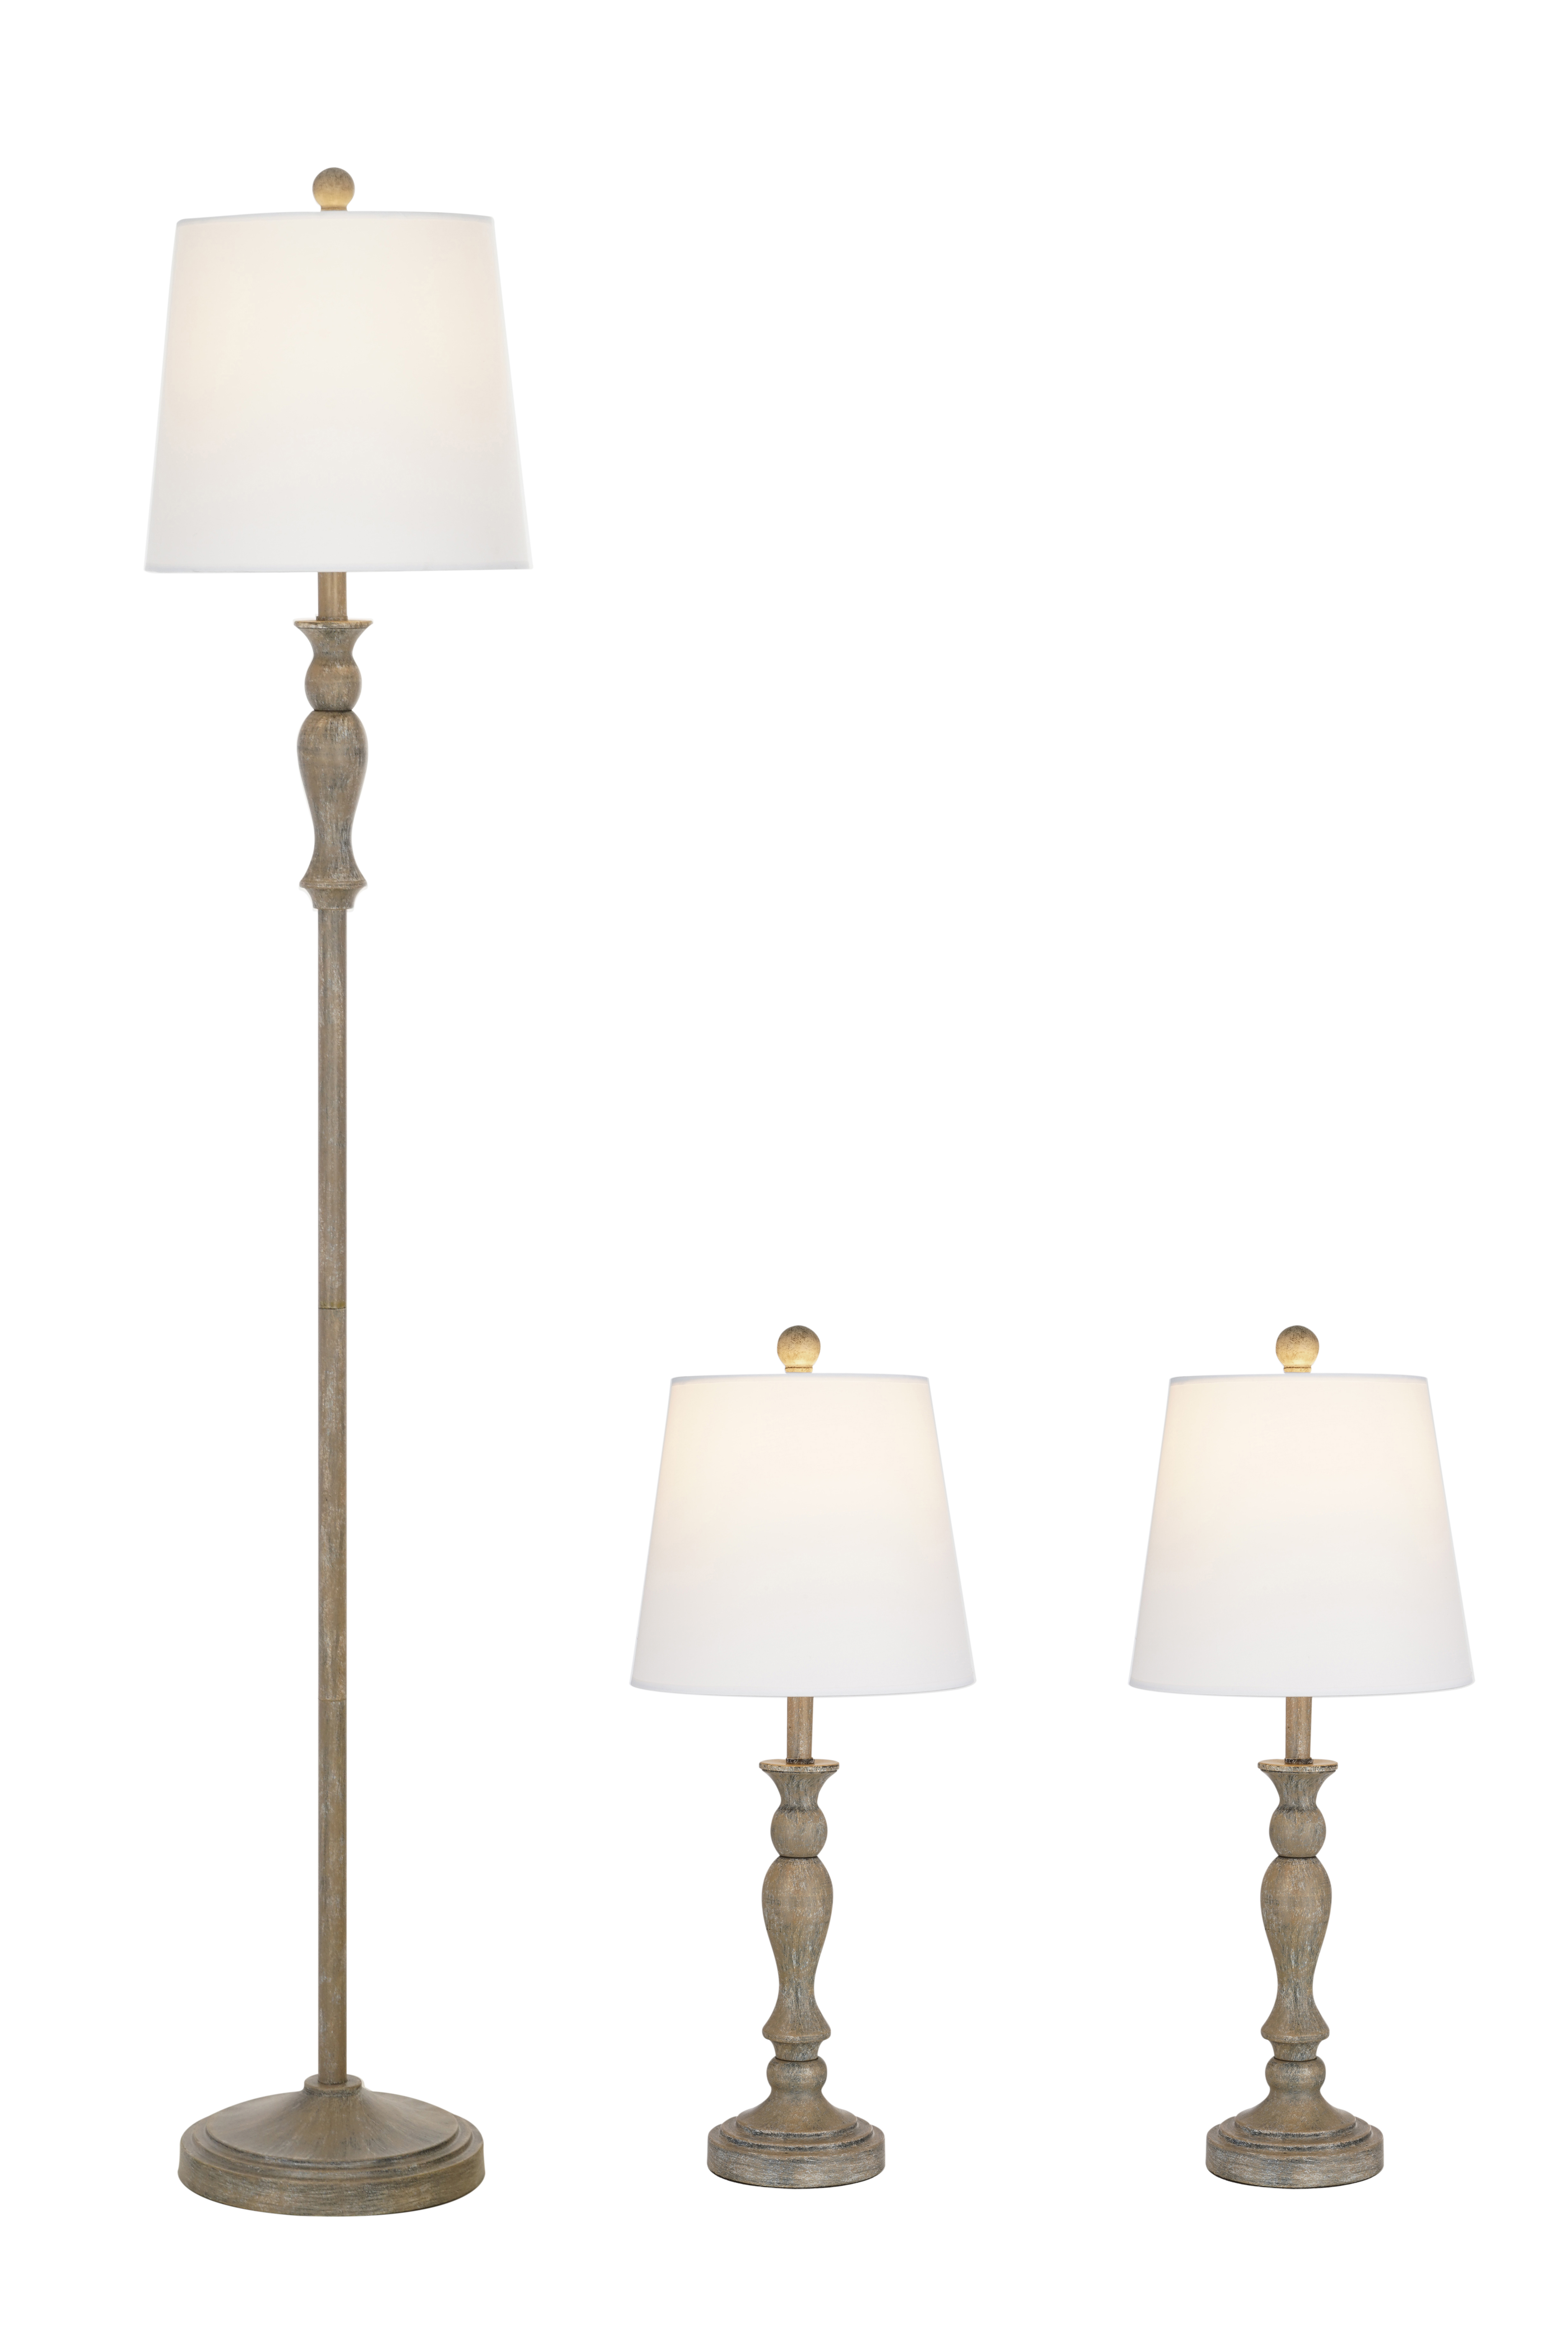 Better Homes & Gardens Modern Farmhouse 3-Pack Table and Floor Lamp Set, Wood Finish - image 2 of 4